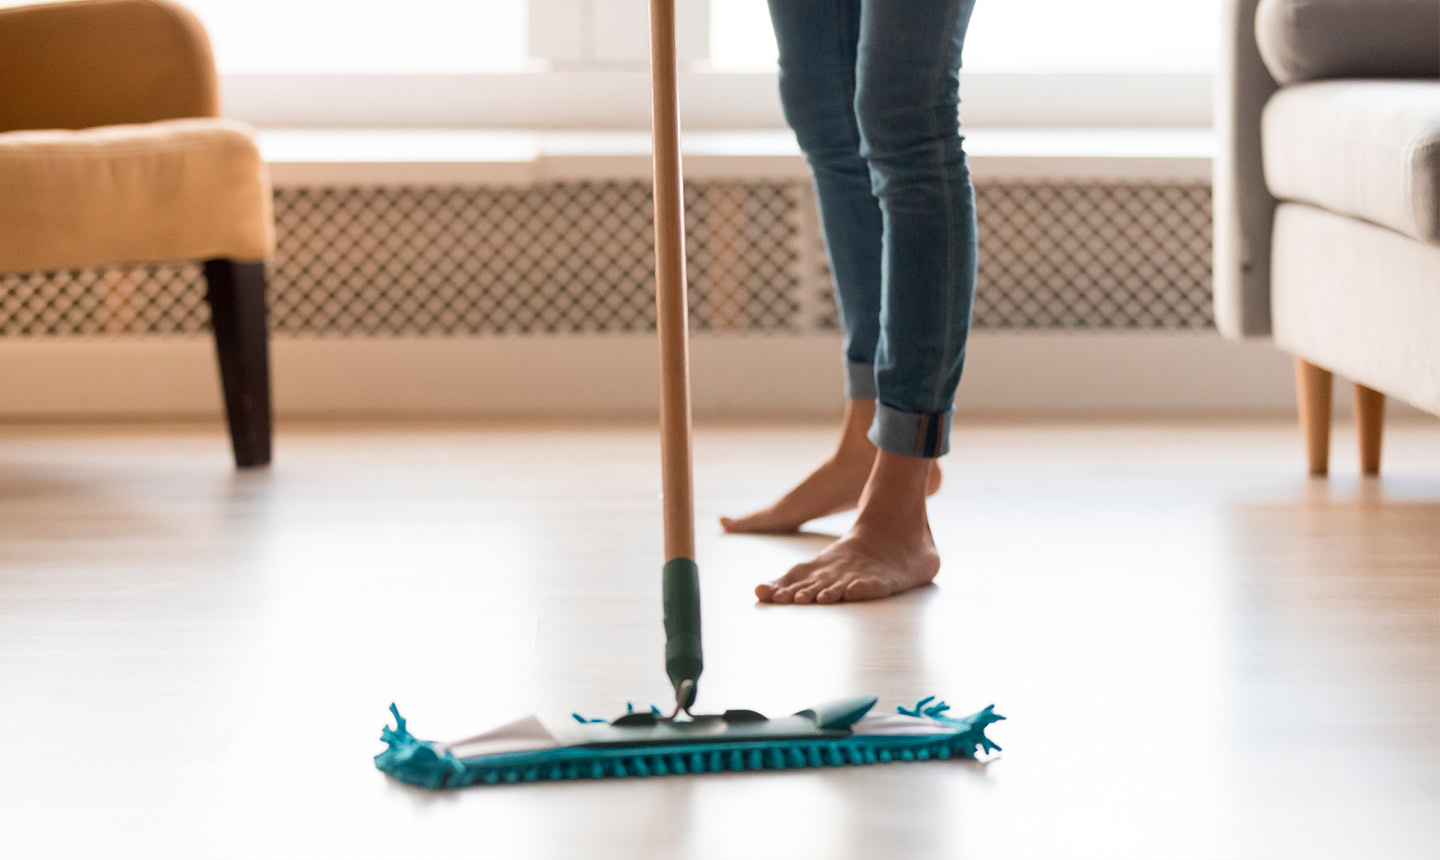 Take your parquet cleaning up one step!